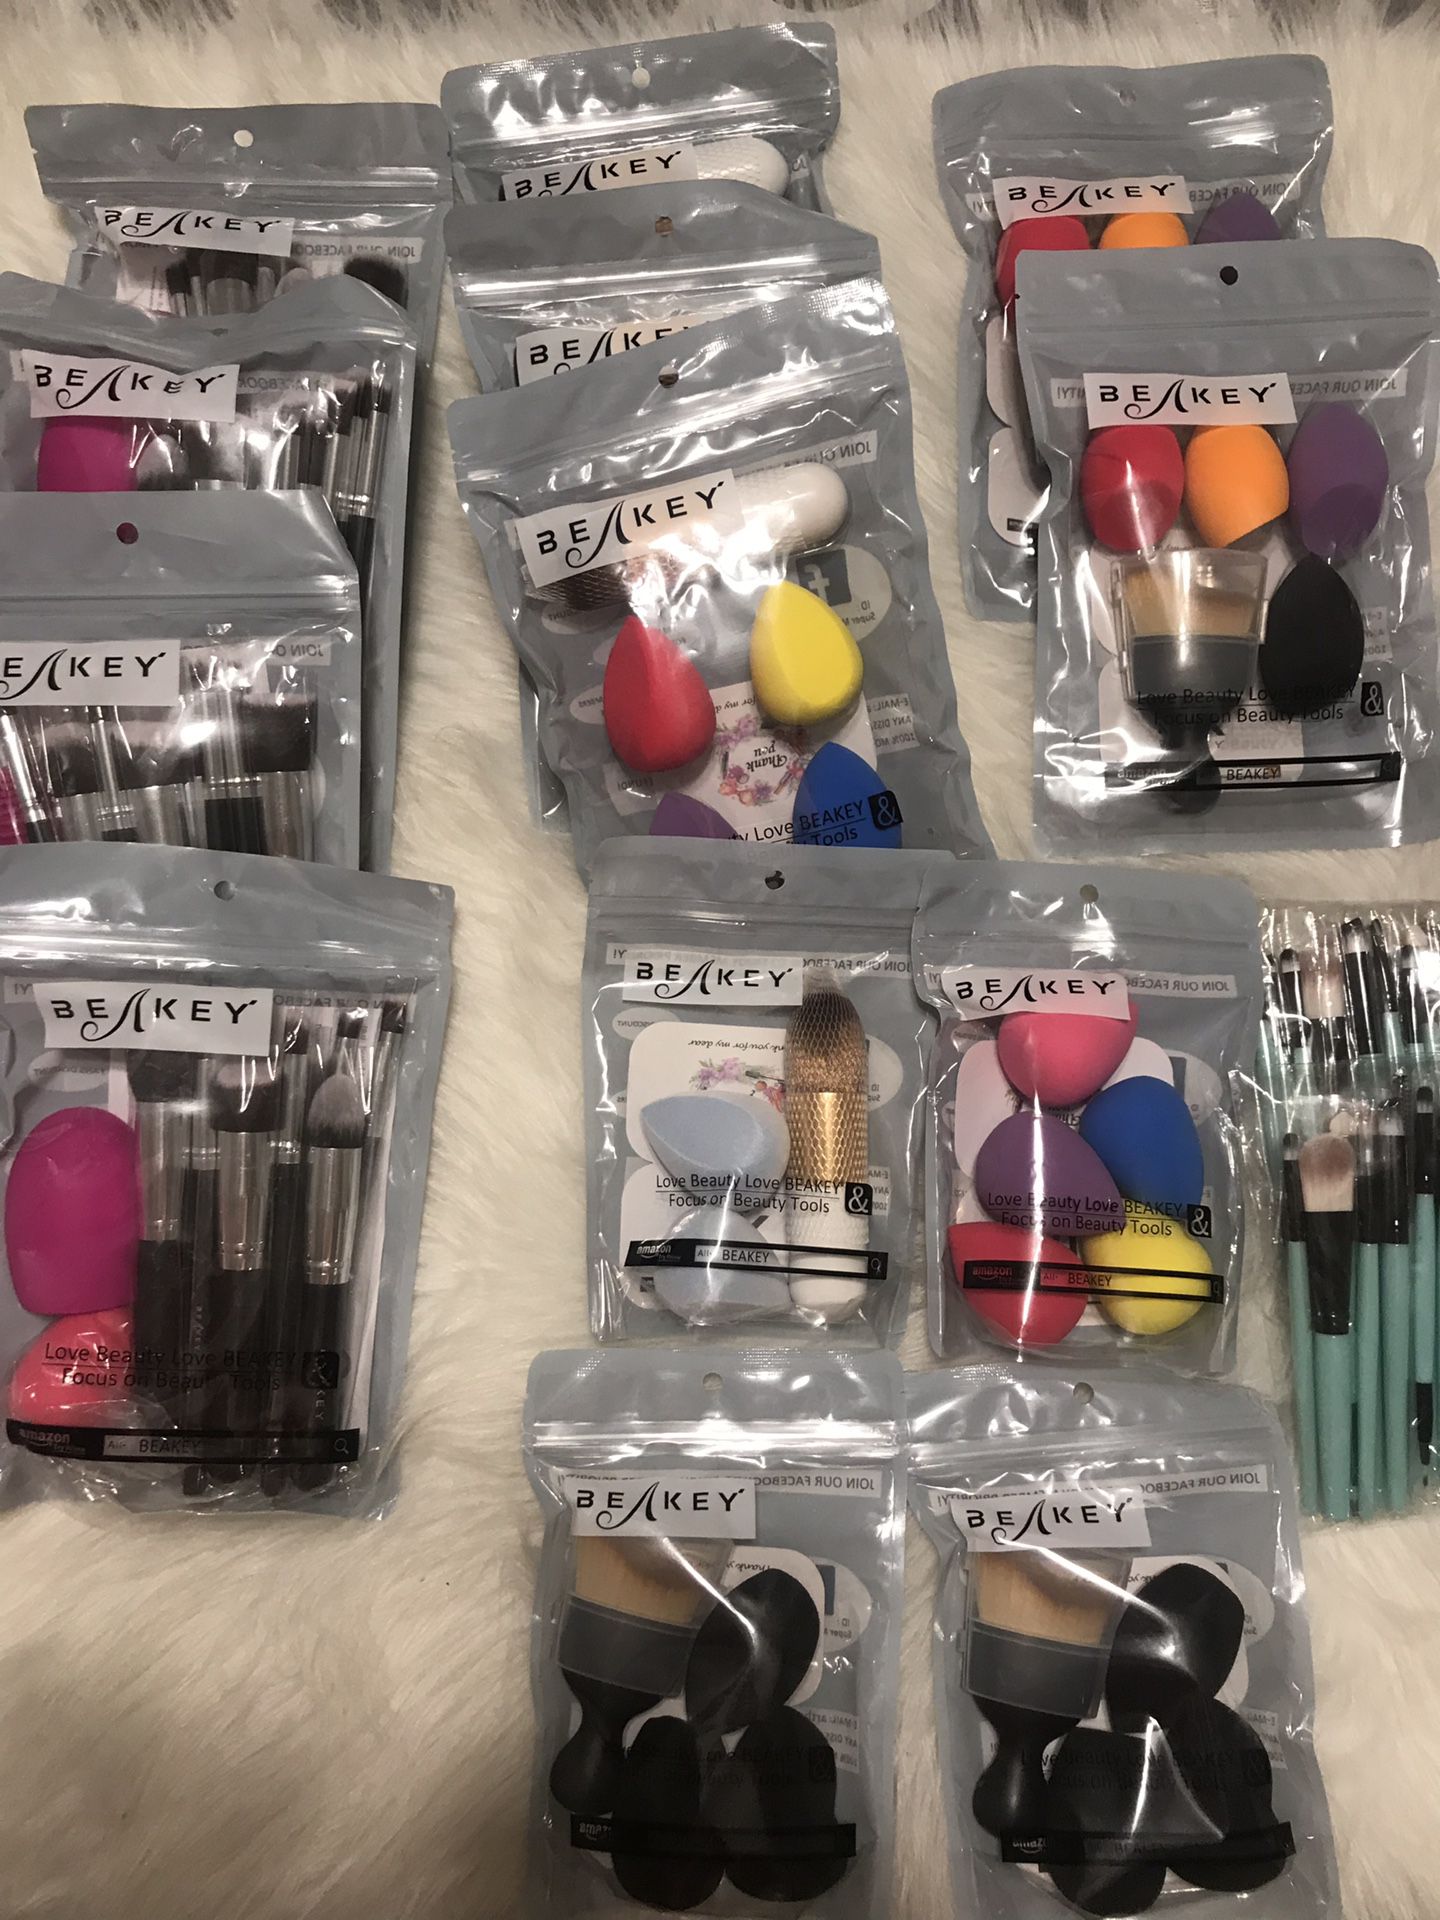 Brand New variety types of makeup Brush sets, Beauty Blenders, prices starting at $10.00 and go up to $20.00. Poos, no holds, pick up in Arnold